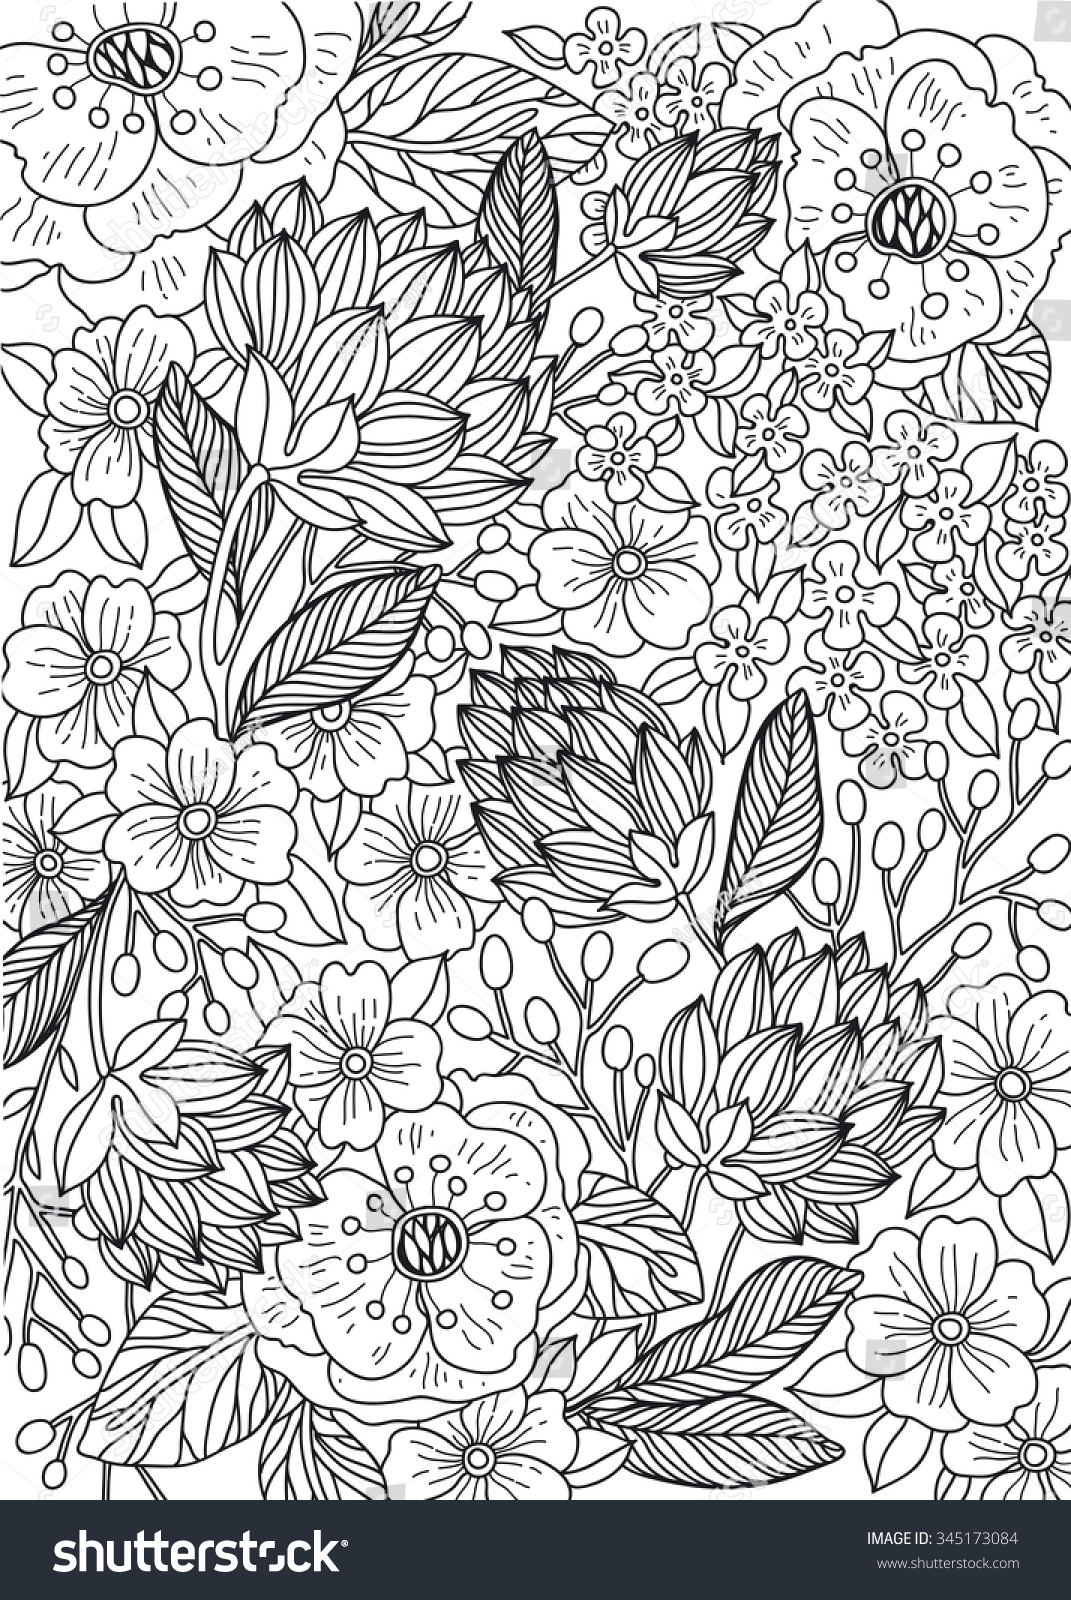 Vector Floral Background Hand Drawn Flowers Stock Royalty